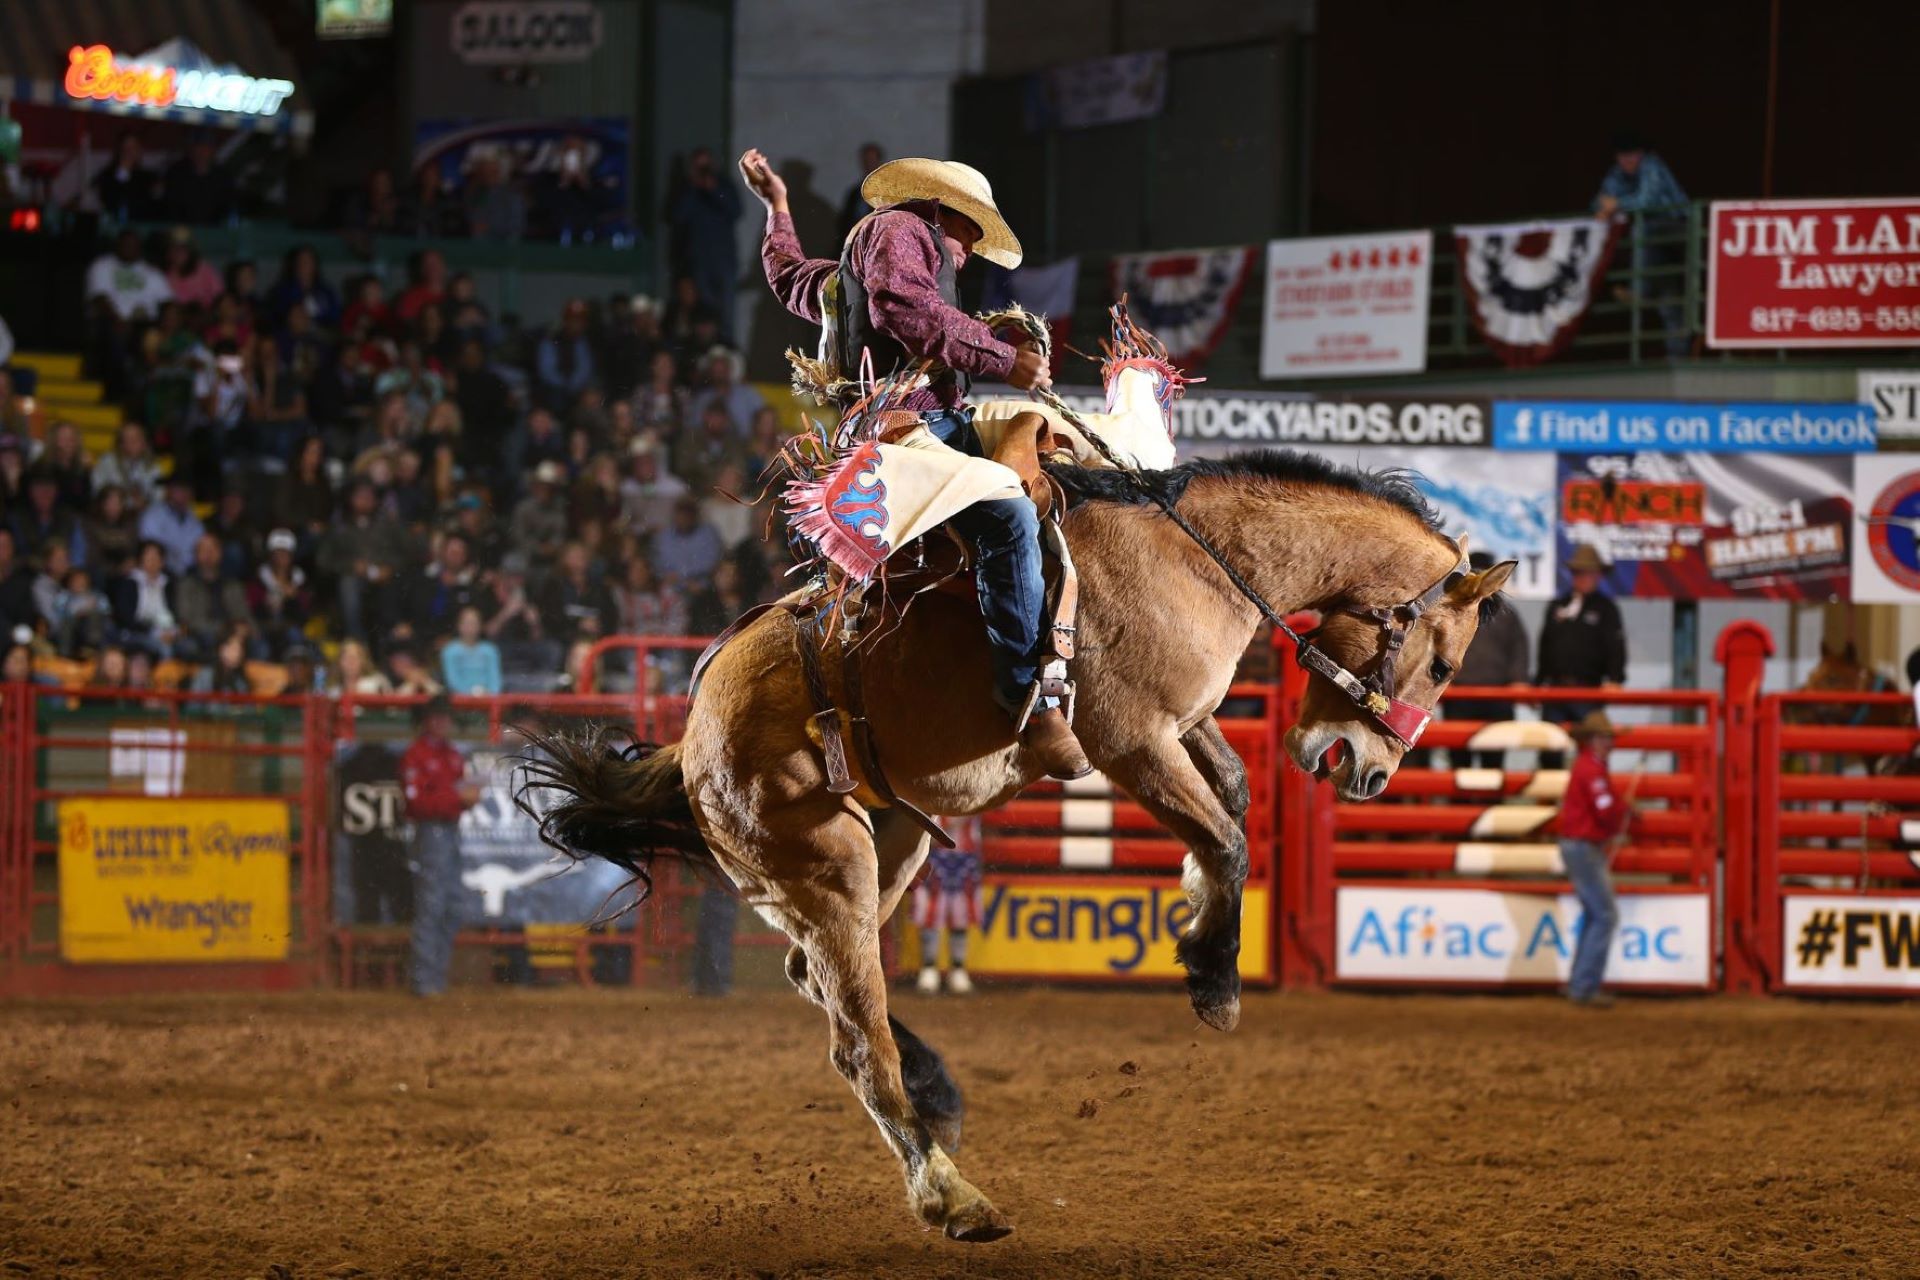 Stockyards Championship Rodeo: Event at the Dallas / Arlington KOA Holiday  Campground in Texas